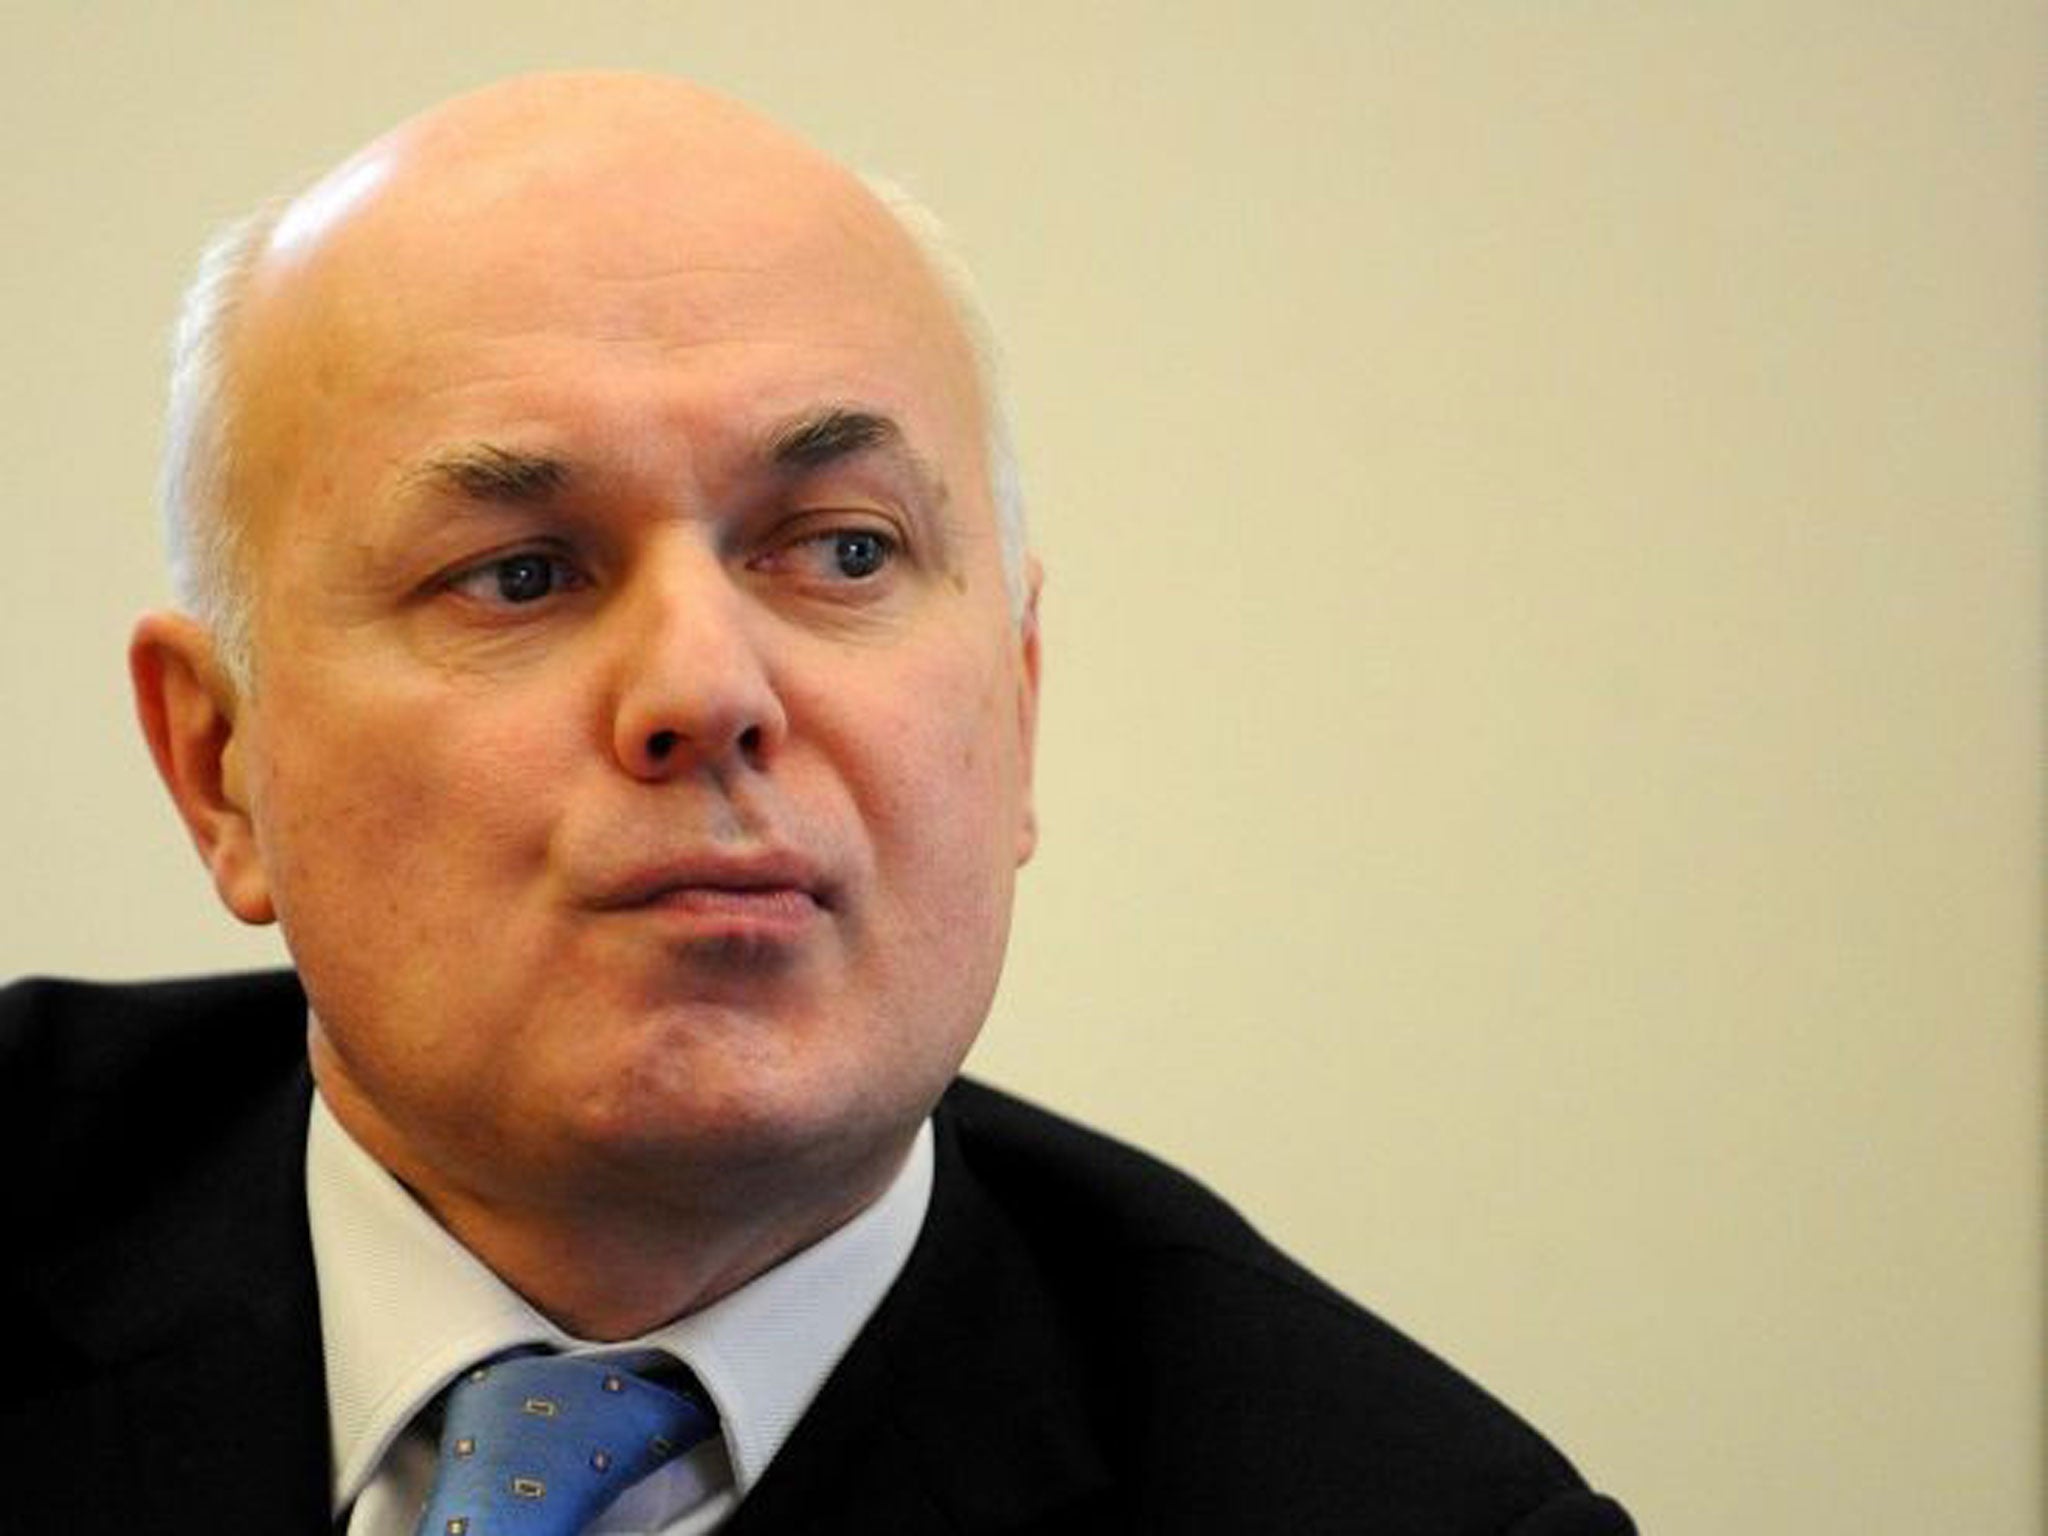 Iain Duncan Smith defended the benefit caps